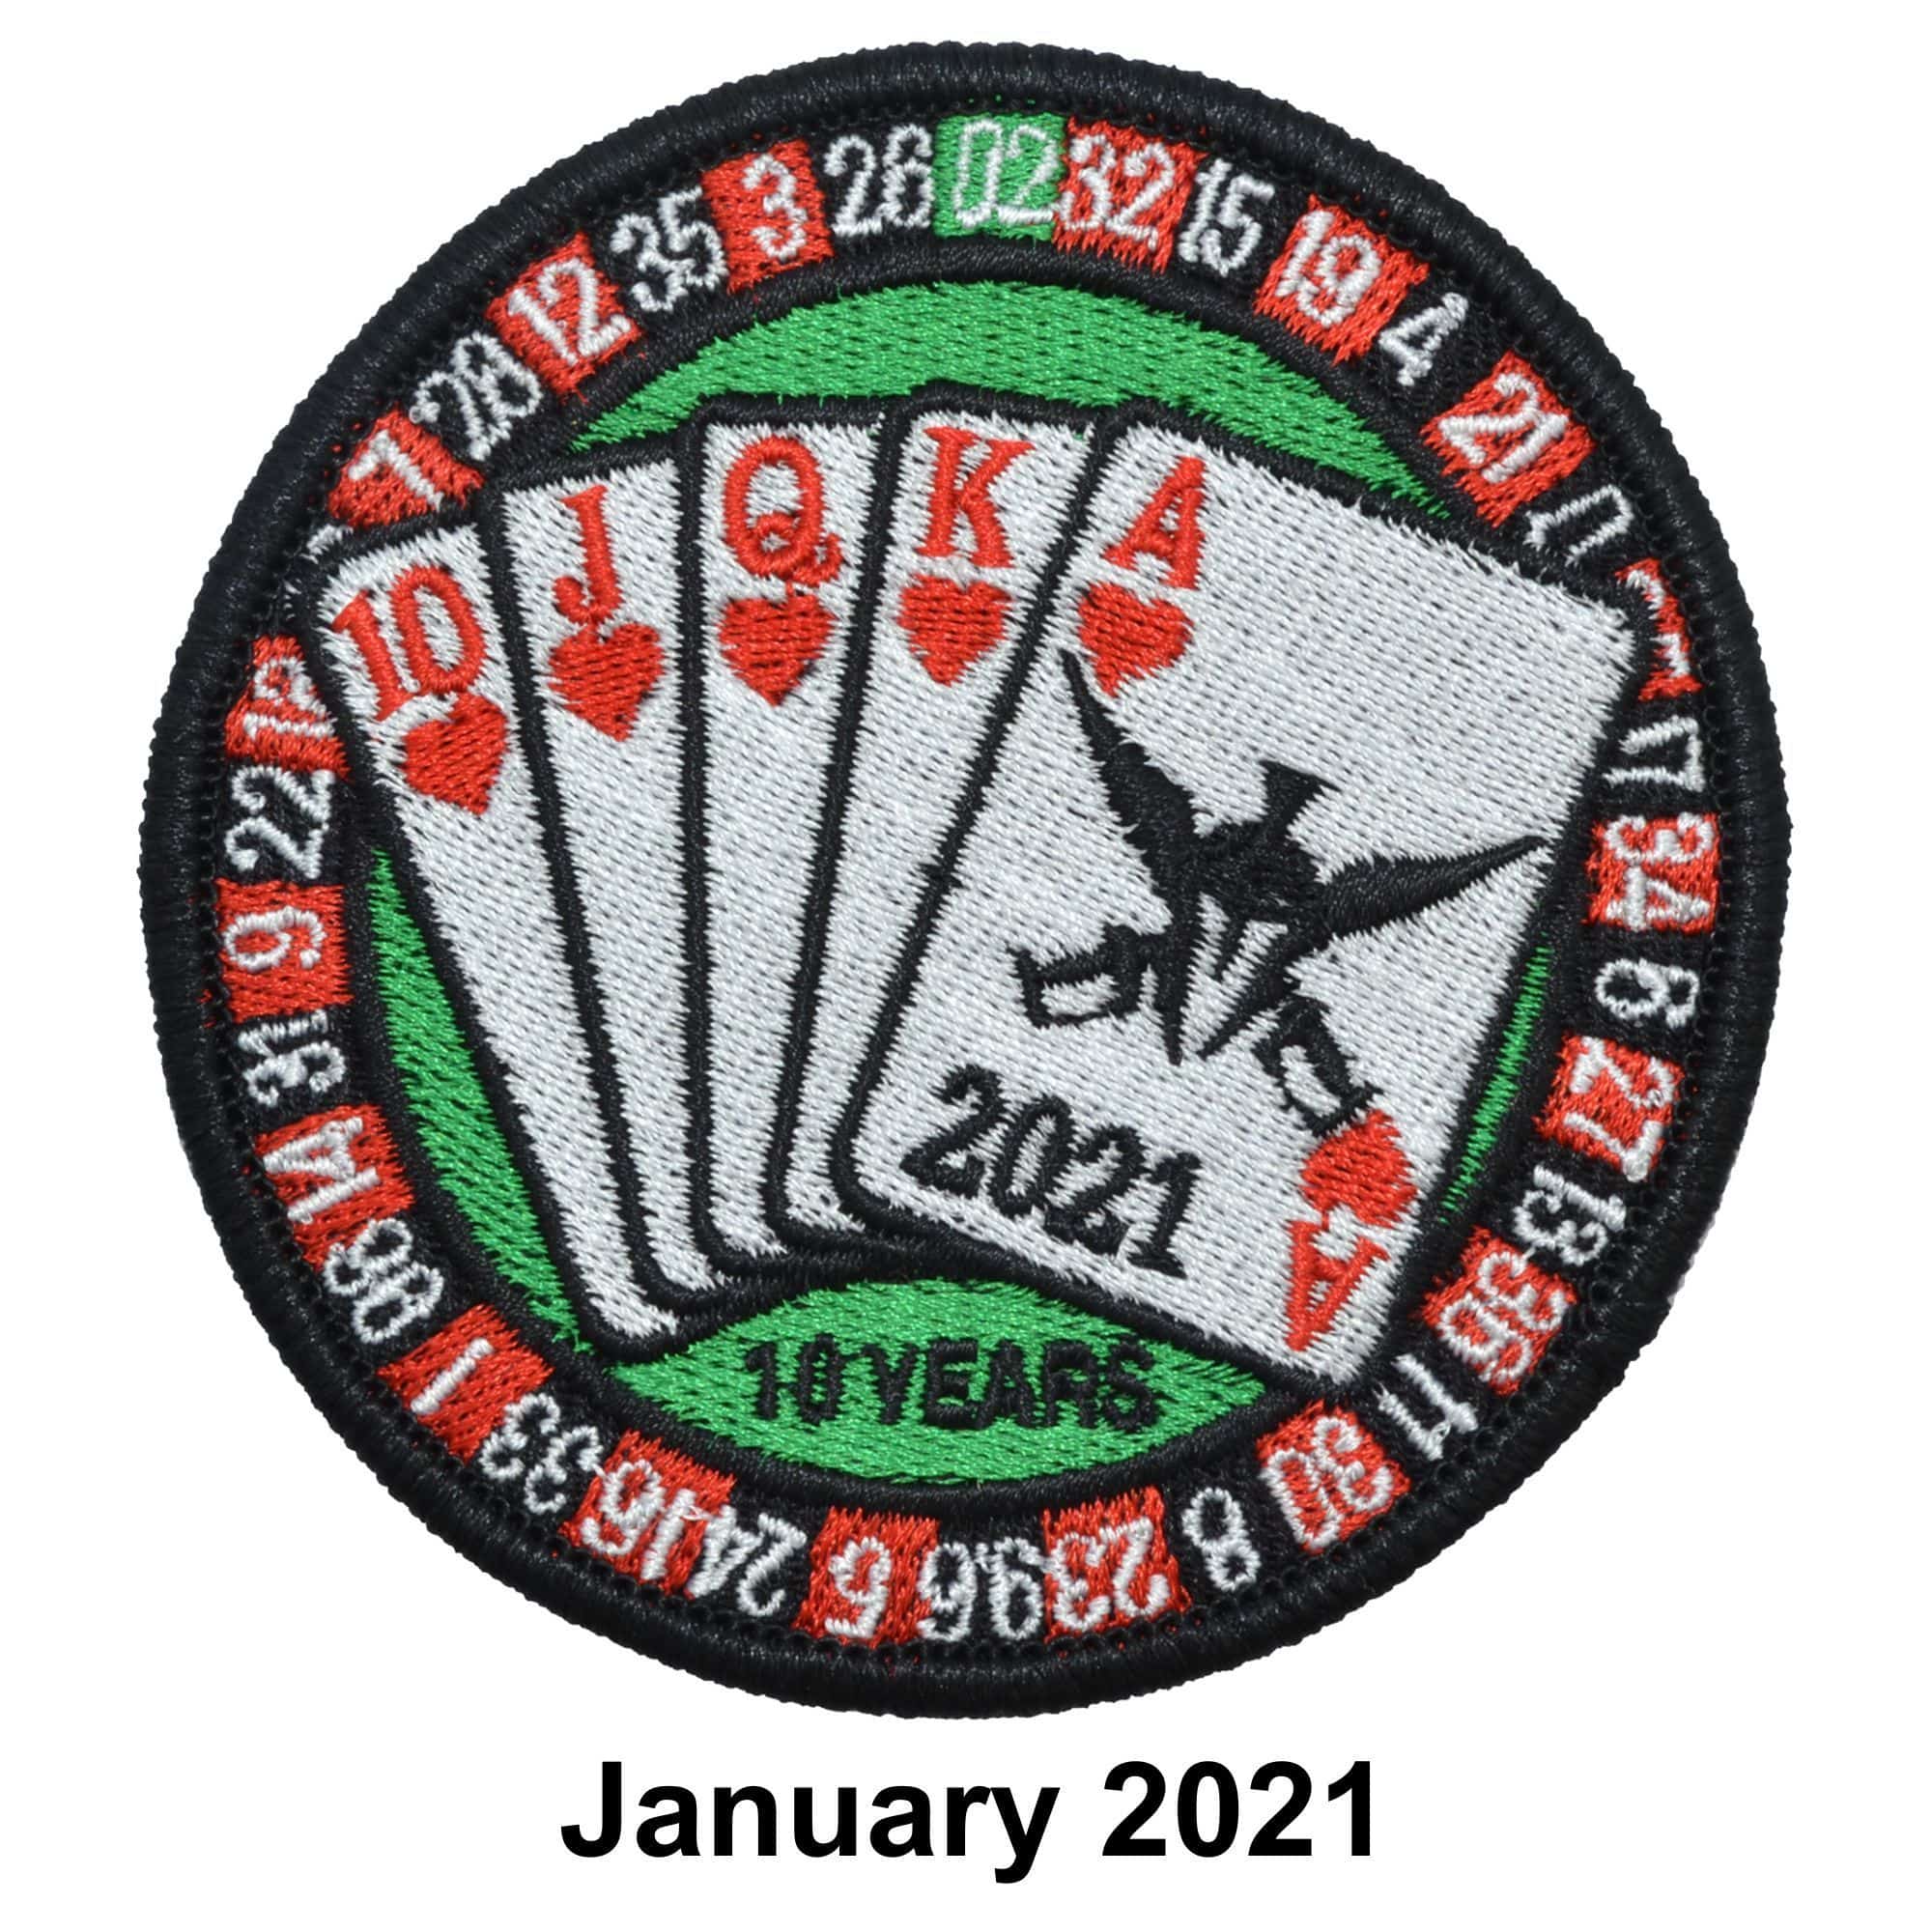 January 2021 Patch of the Month - 'The Winning Hand' Roulette Wheel